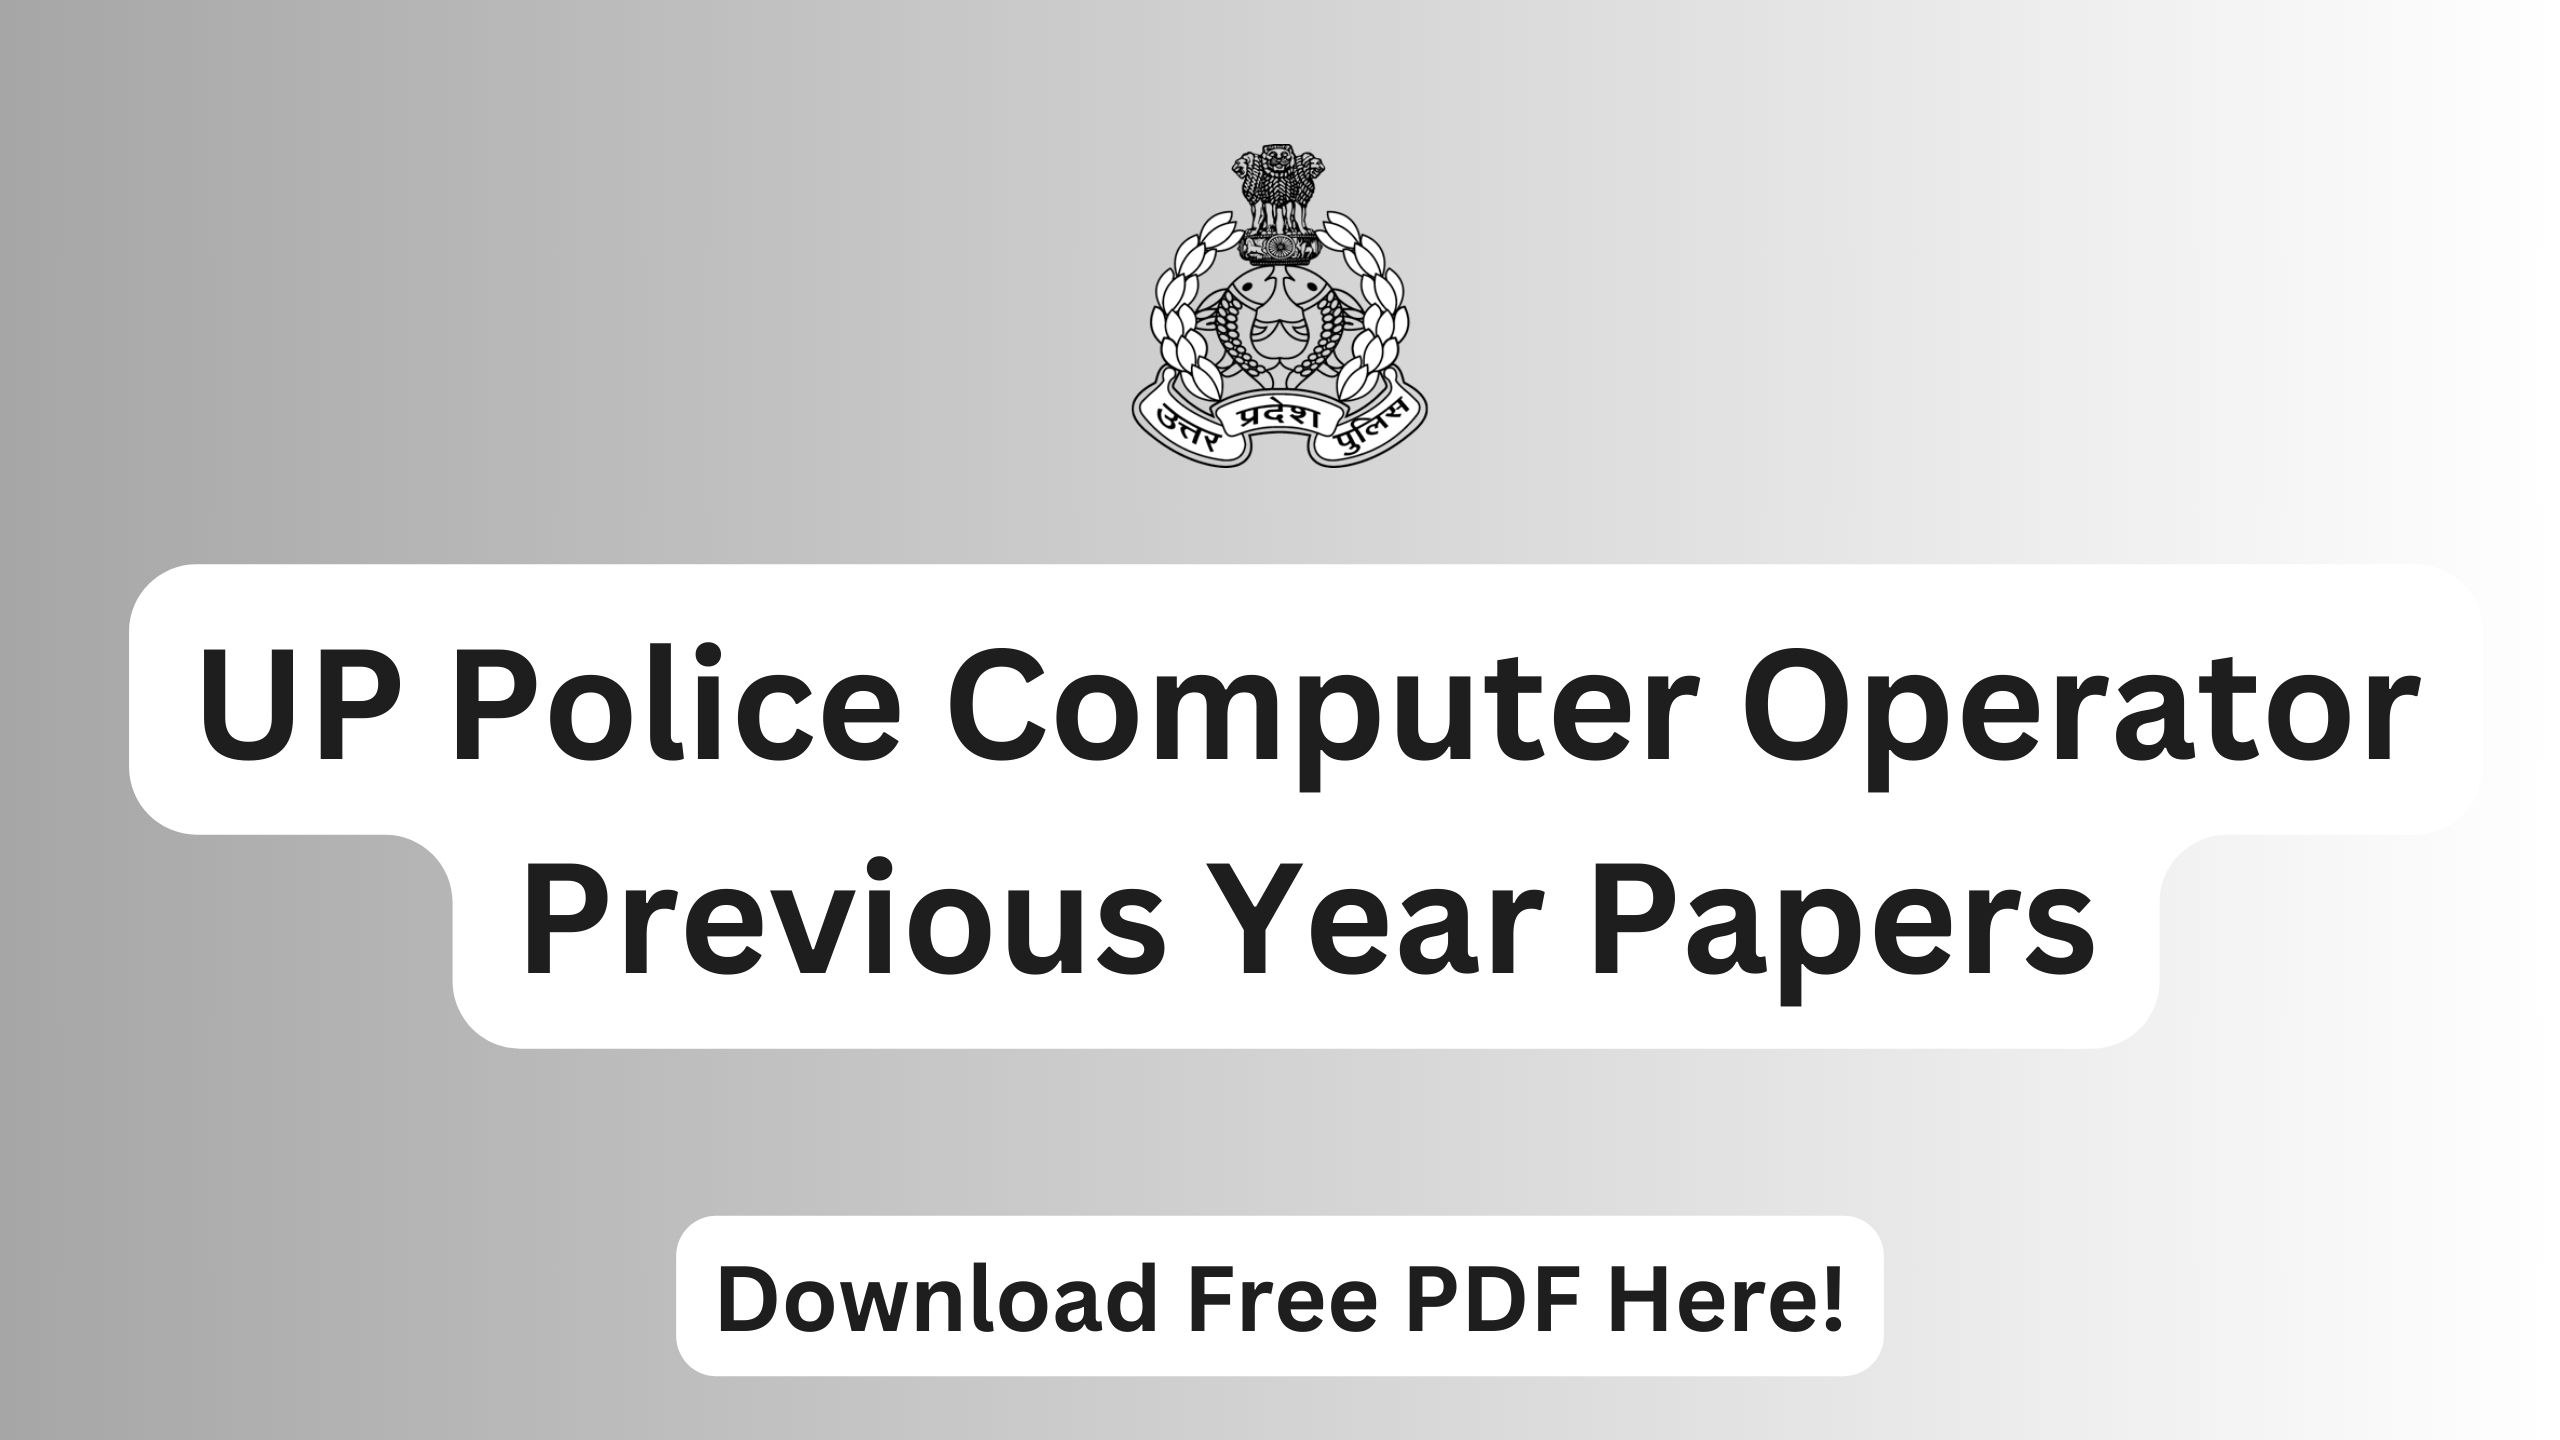 UP Police Computer Operator Previous Year Papers, Download Free PDF Here!